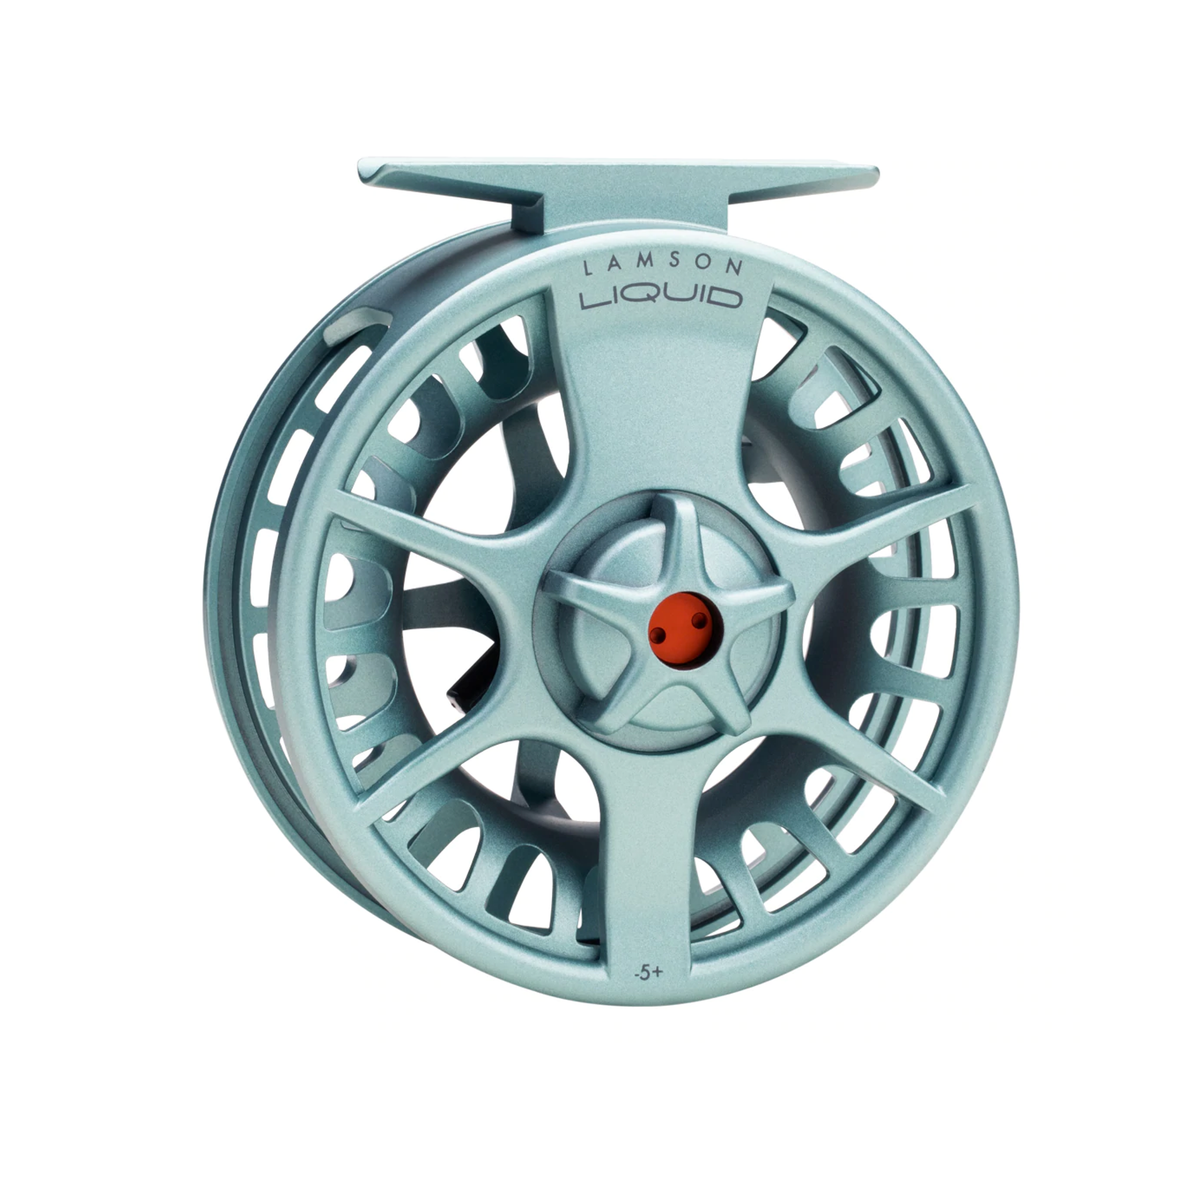 AirFlo Rage Compact - Iron Bow Fly Shop